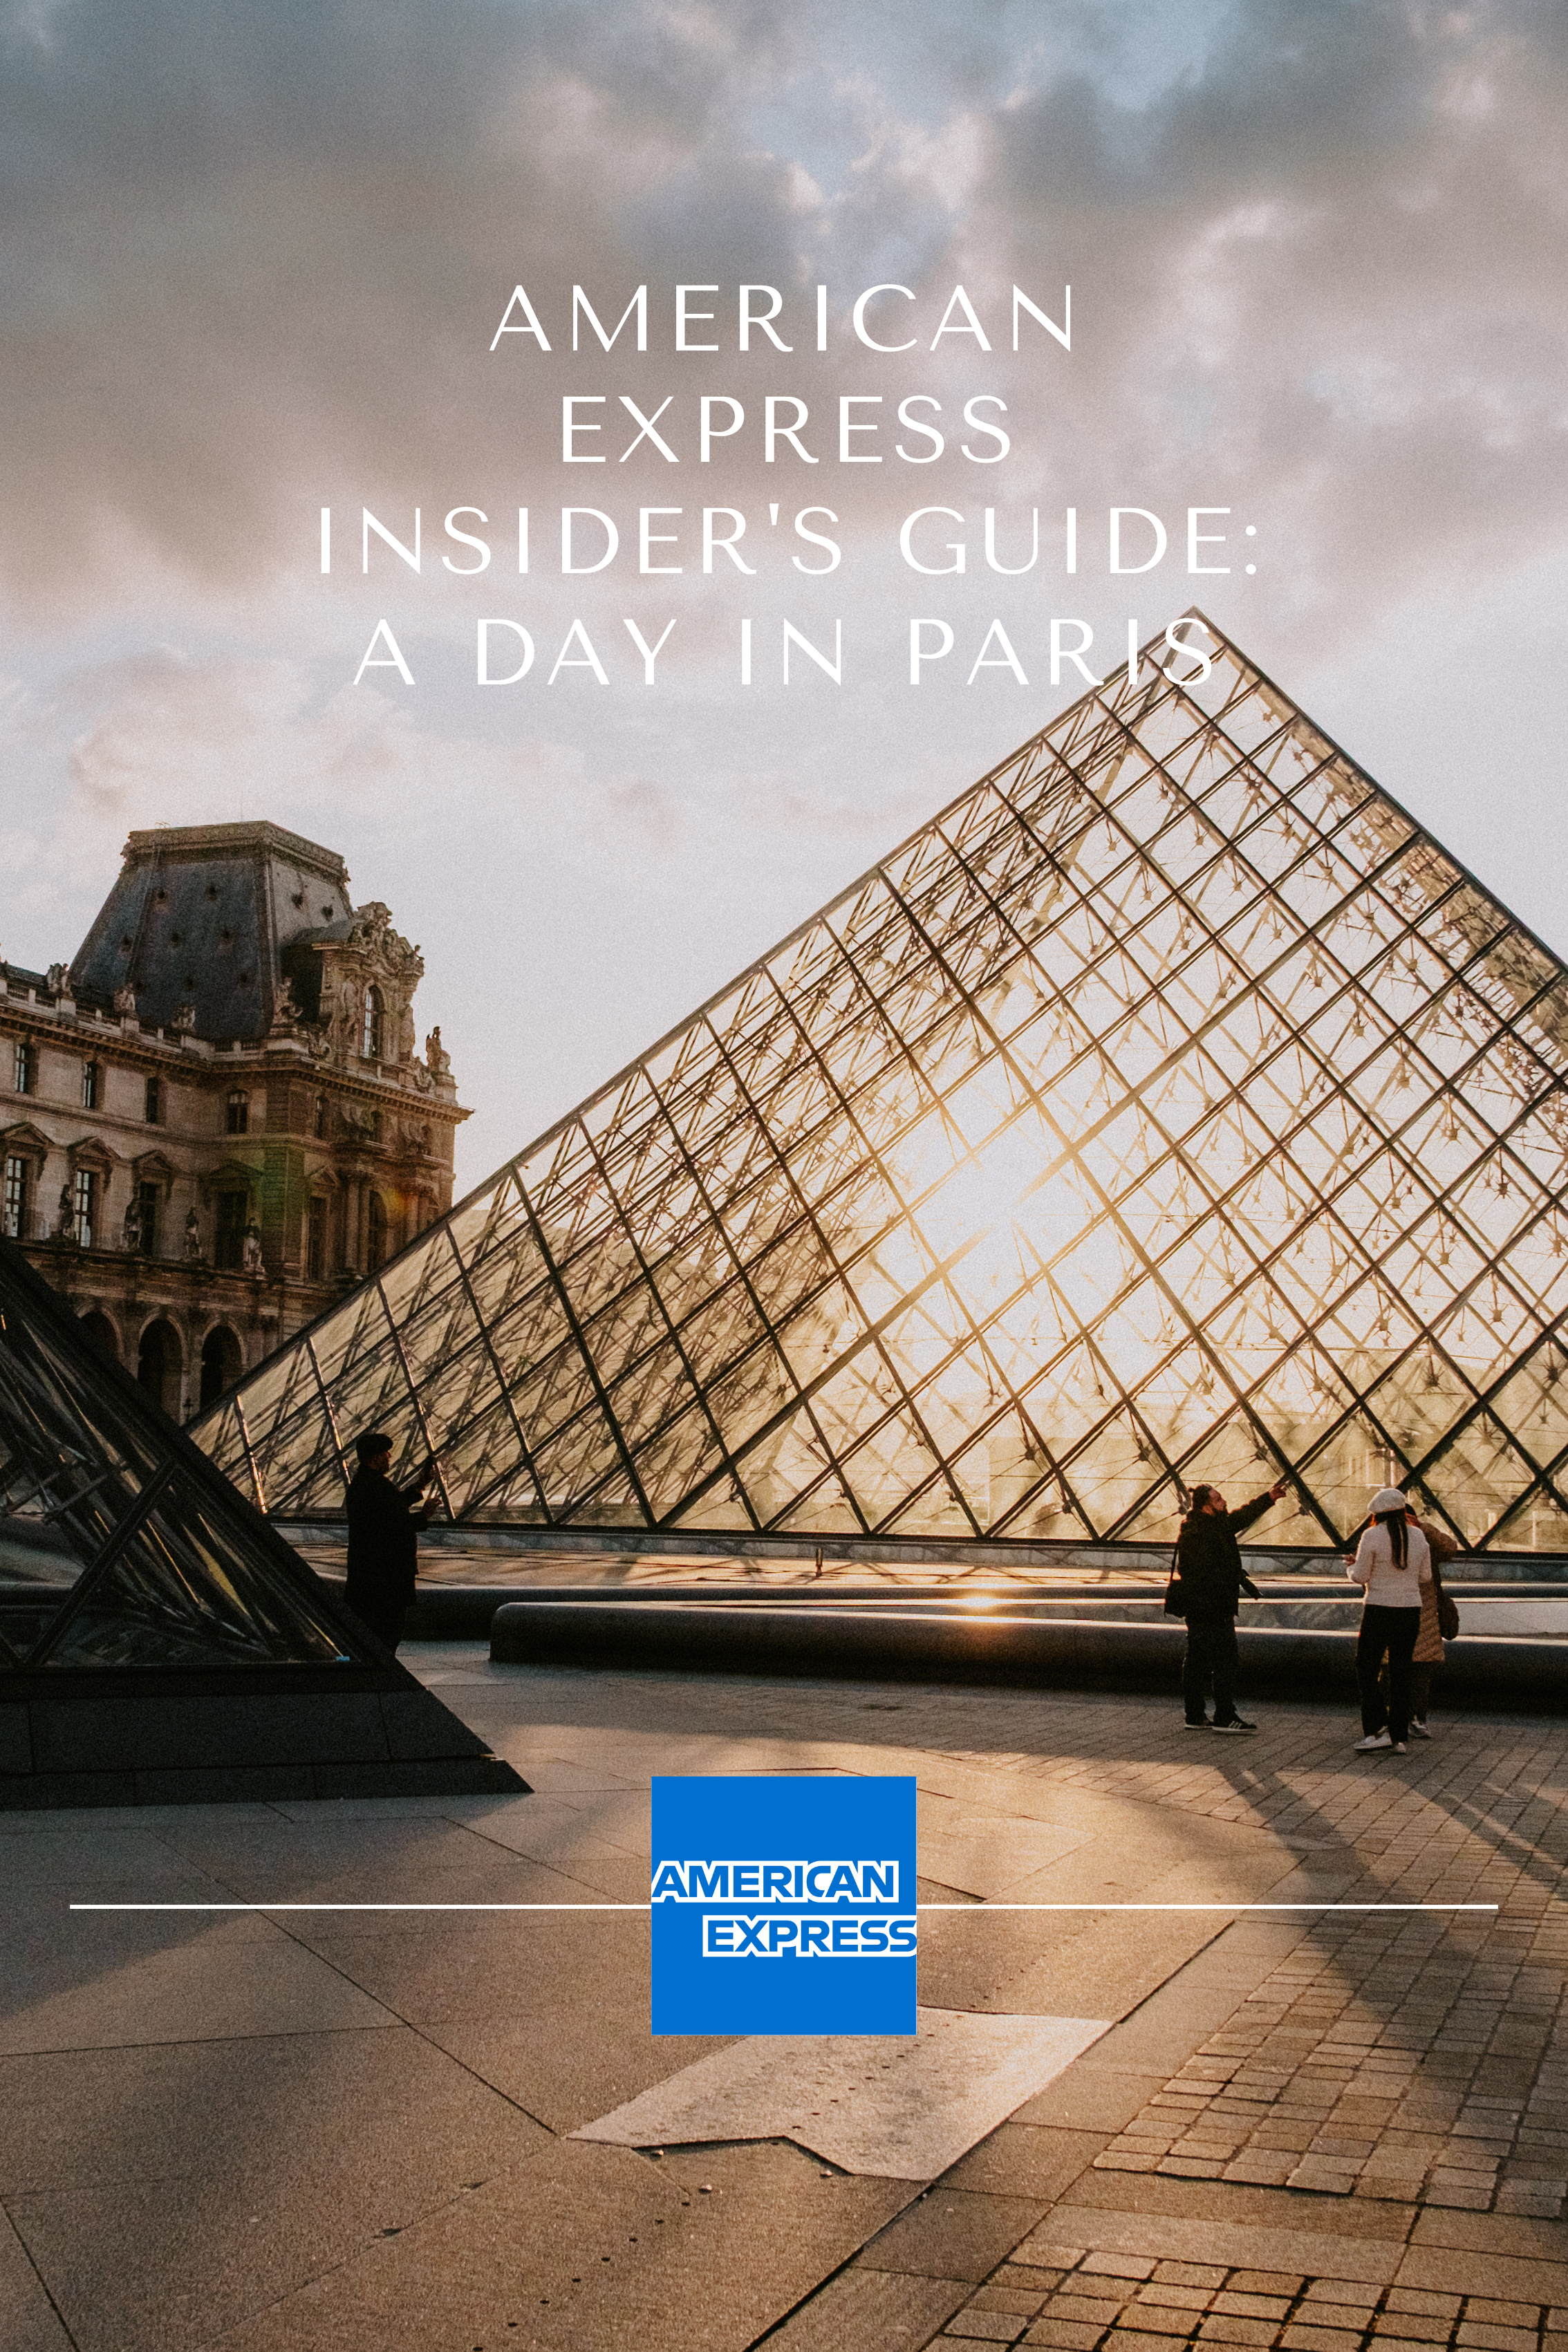 American Express Insider's Guide: A Day in Paris